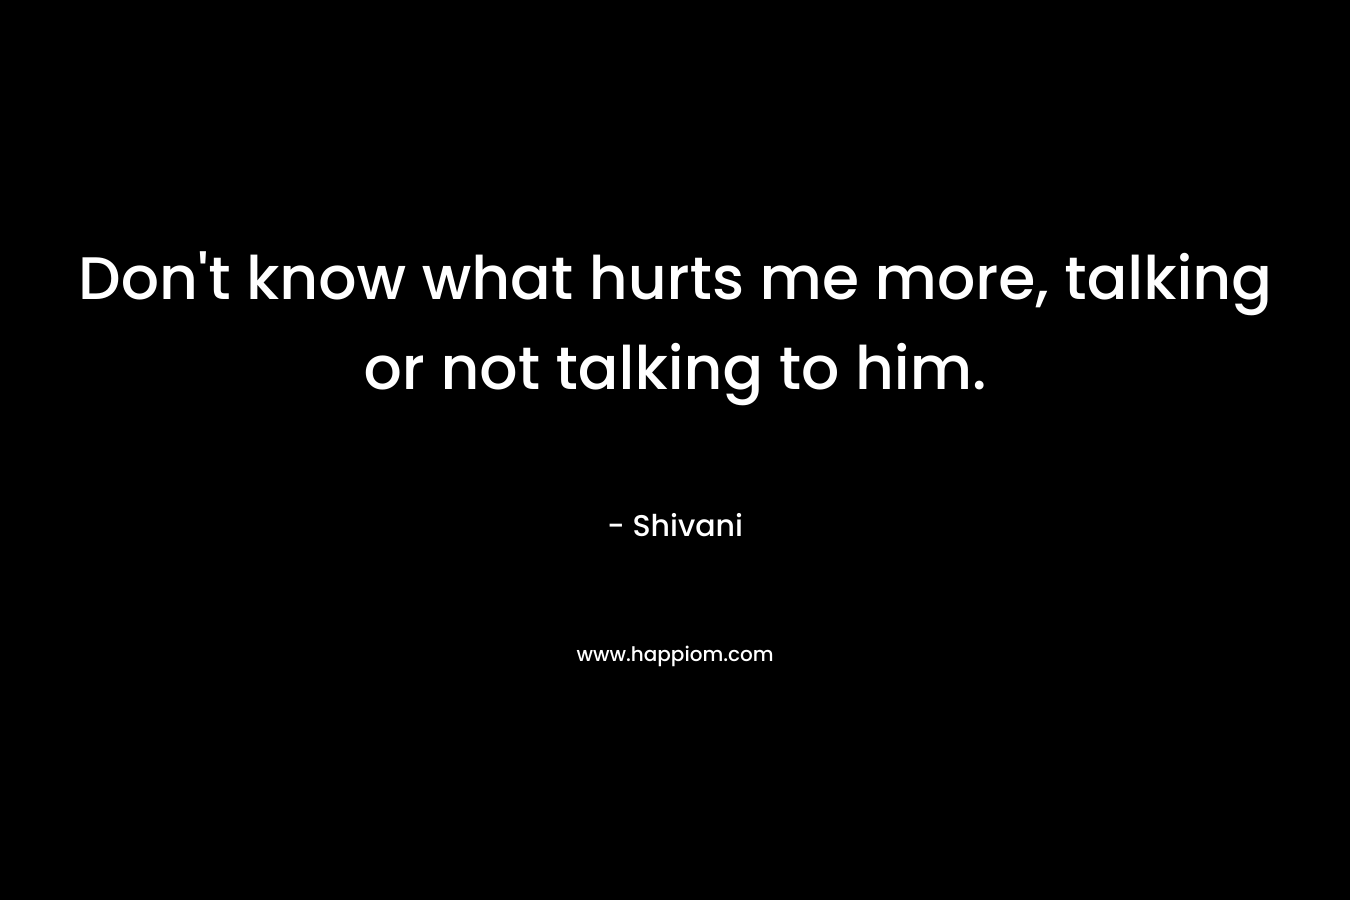 Don’t know what hurts me more, talking or not talking to him. – Shivani